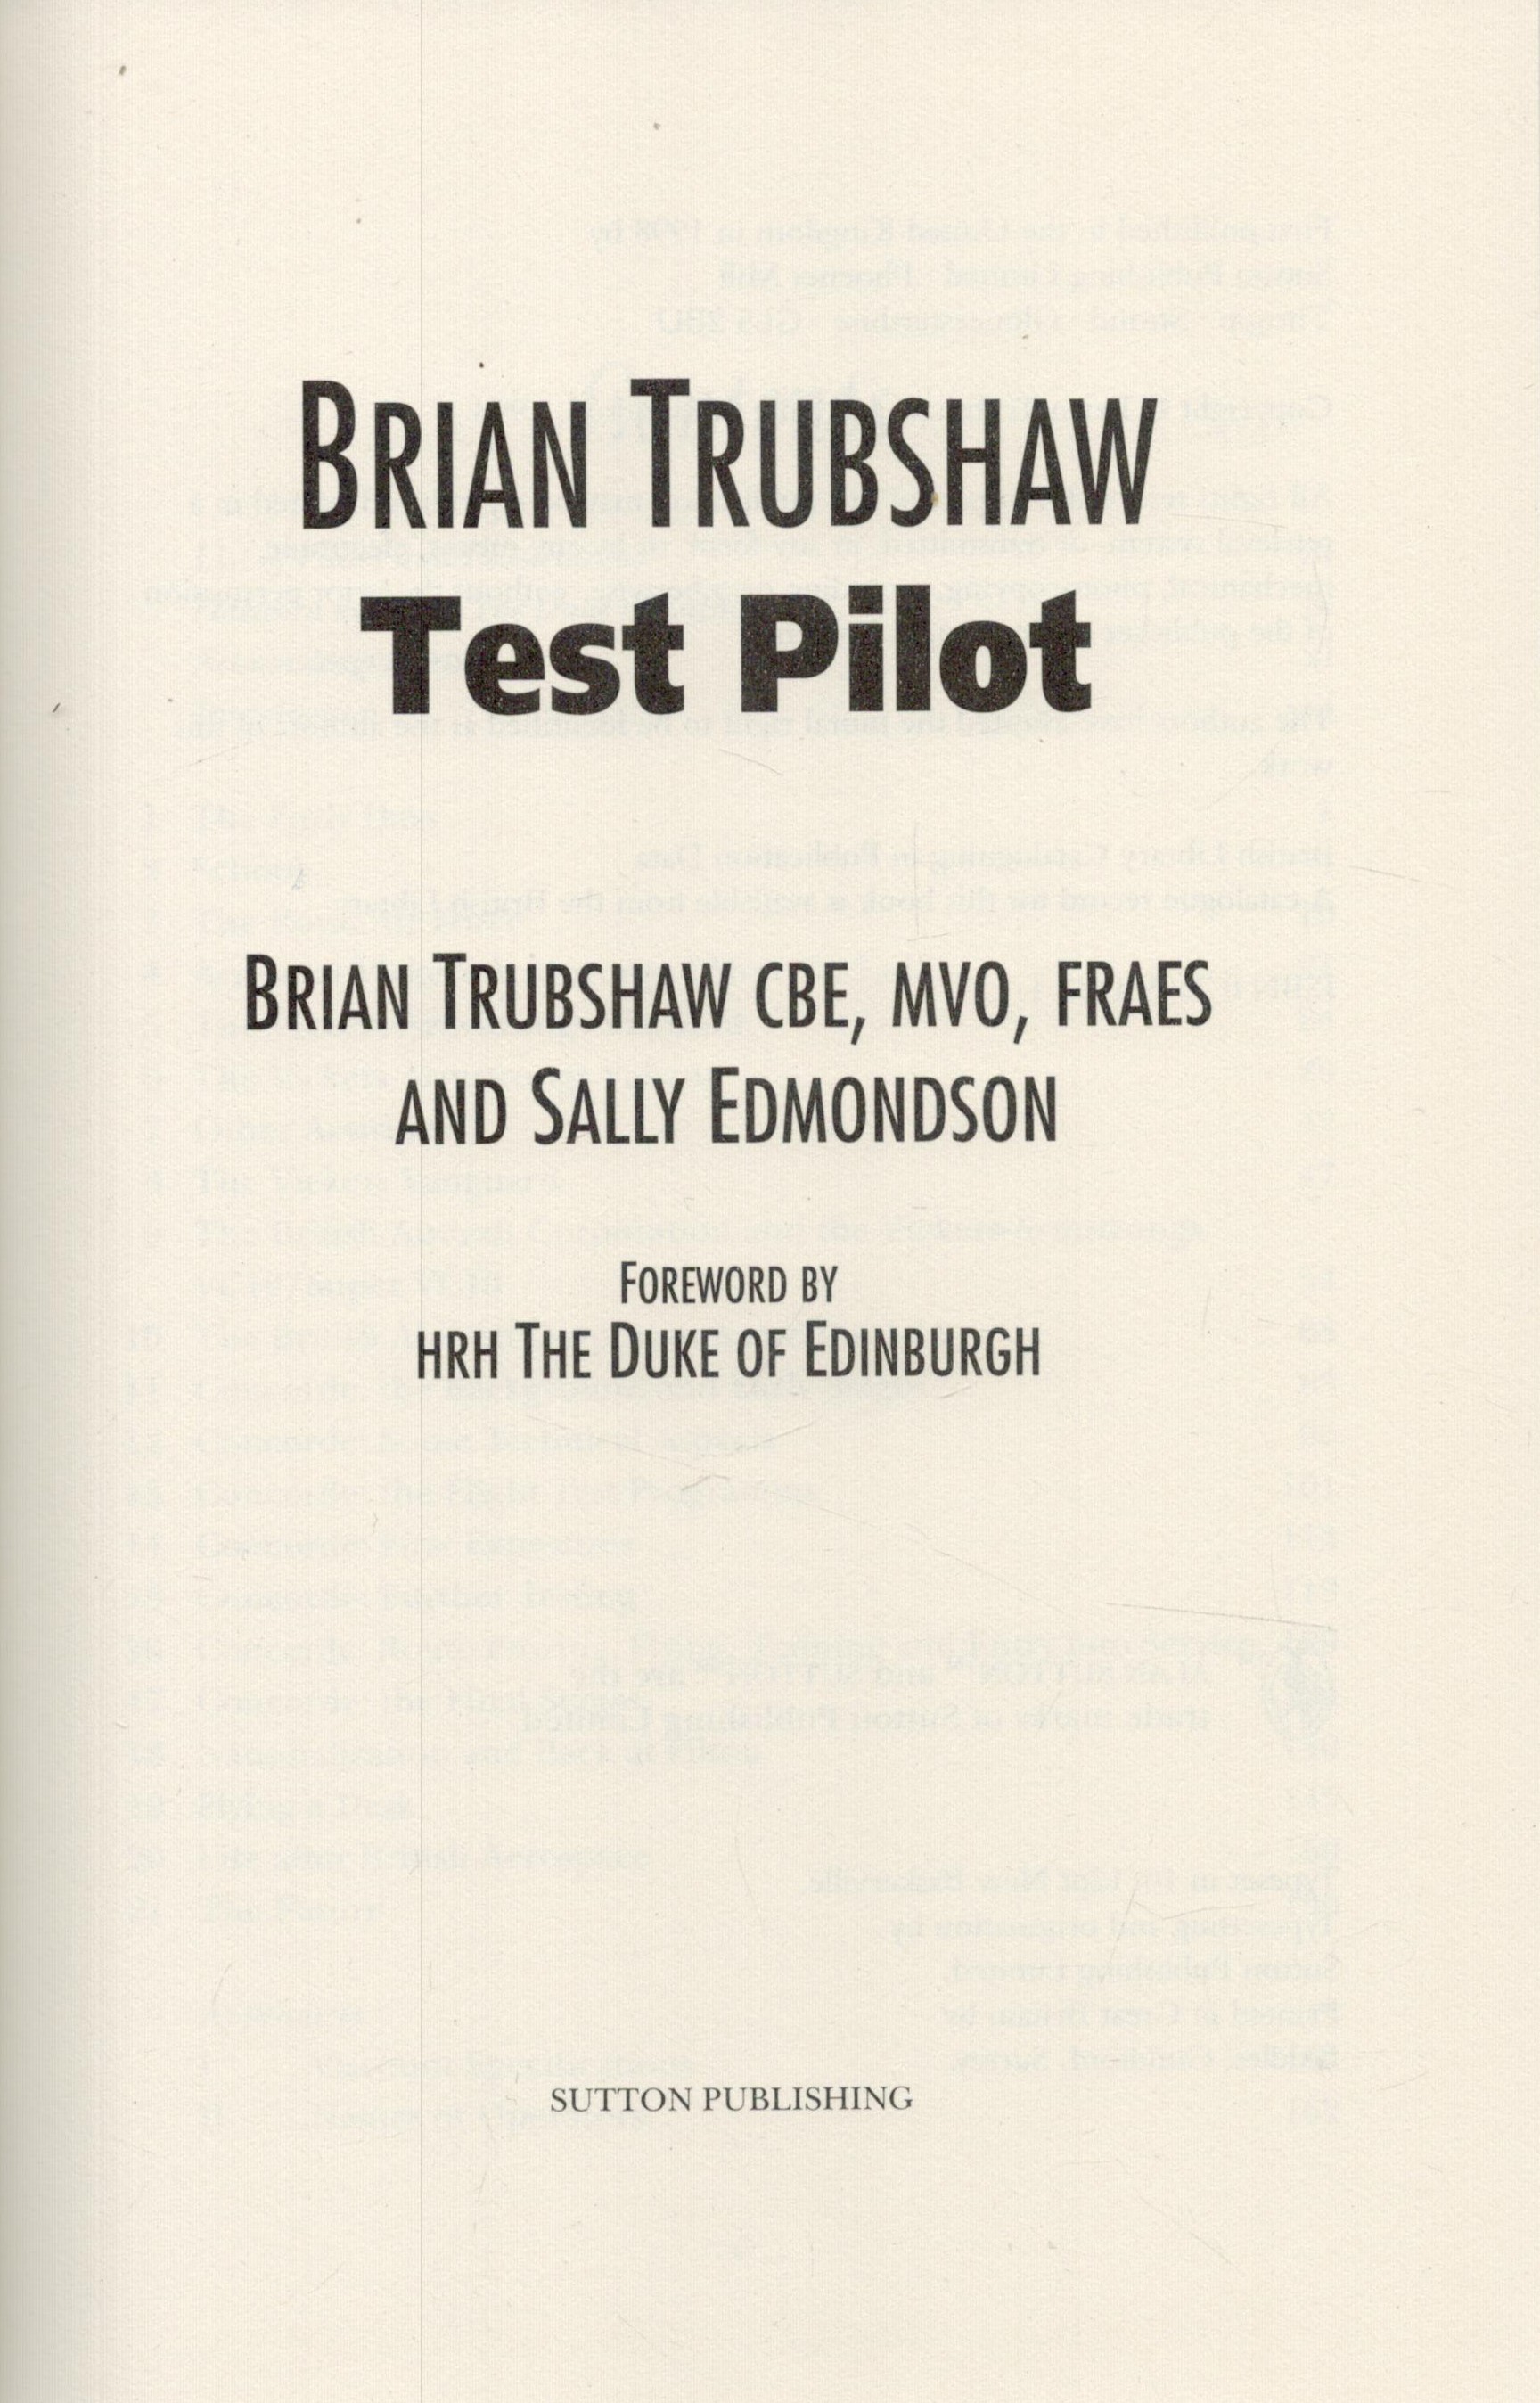 Brian Trubshaw - Test Pilot by Brian Trubshaw. 1st Edition Hardback Book. Published in 1998. Good - Image 2 of 3